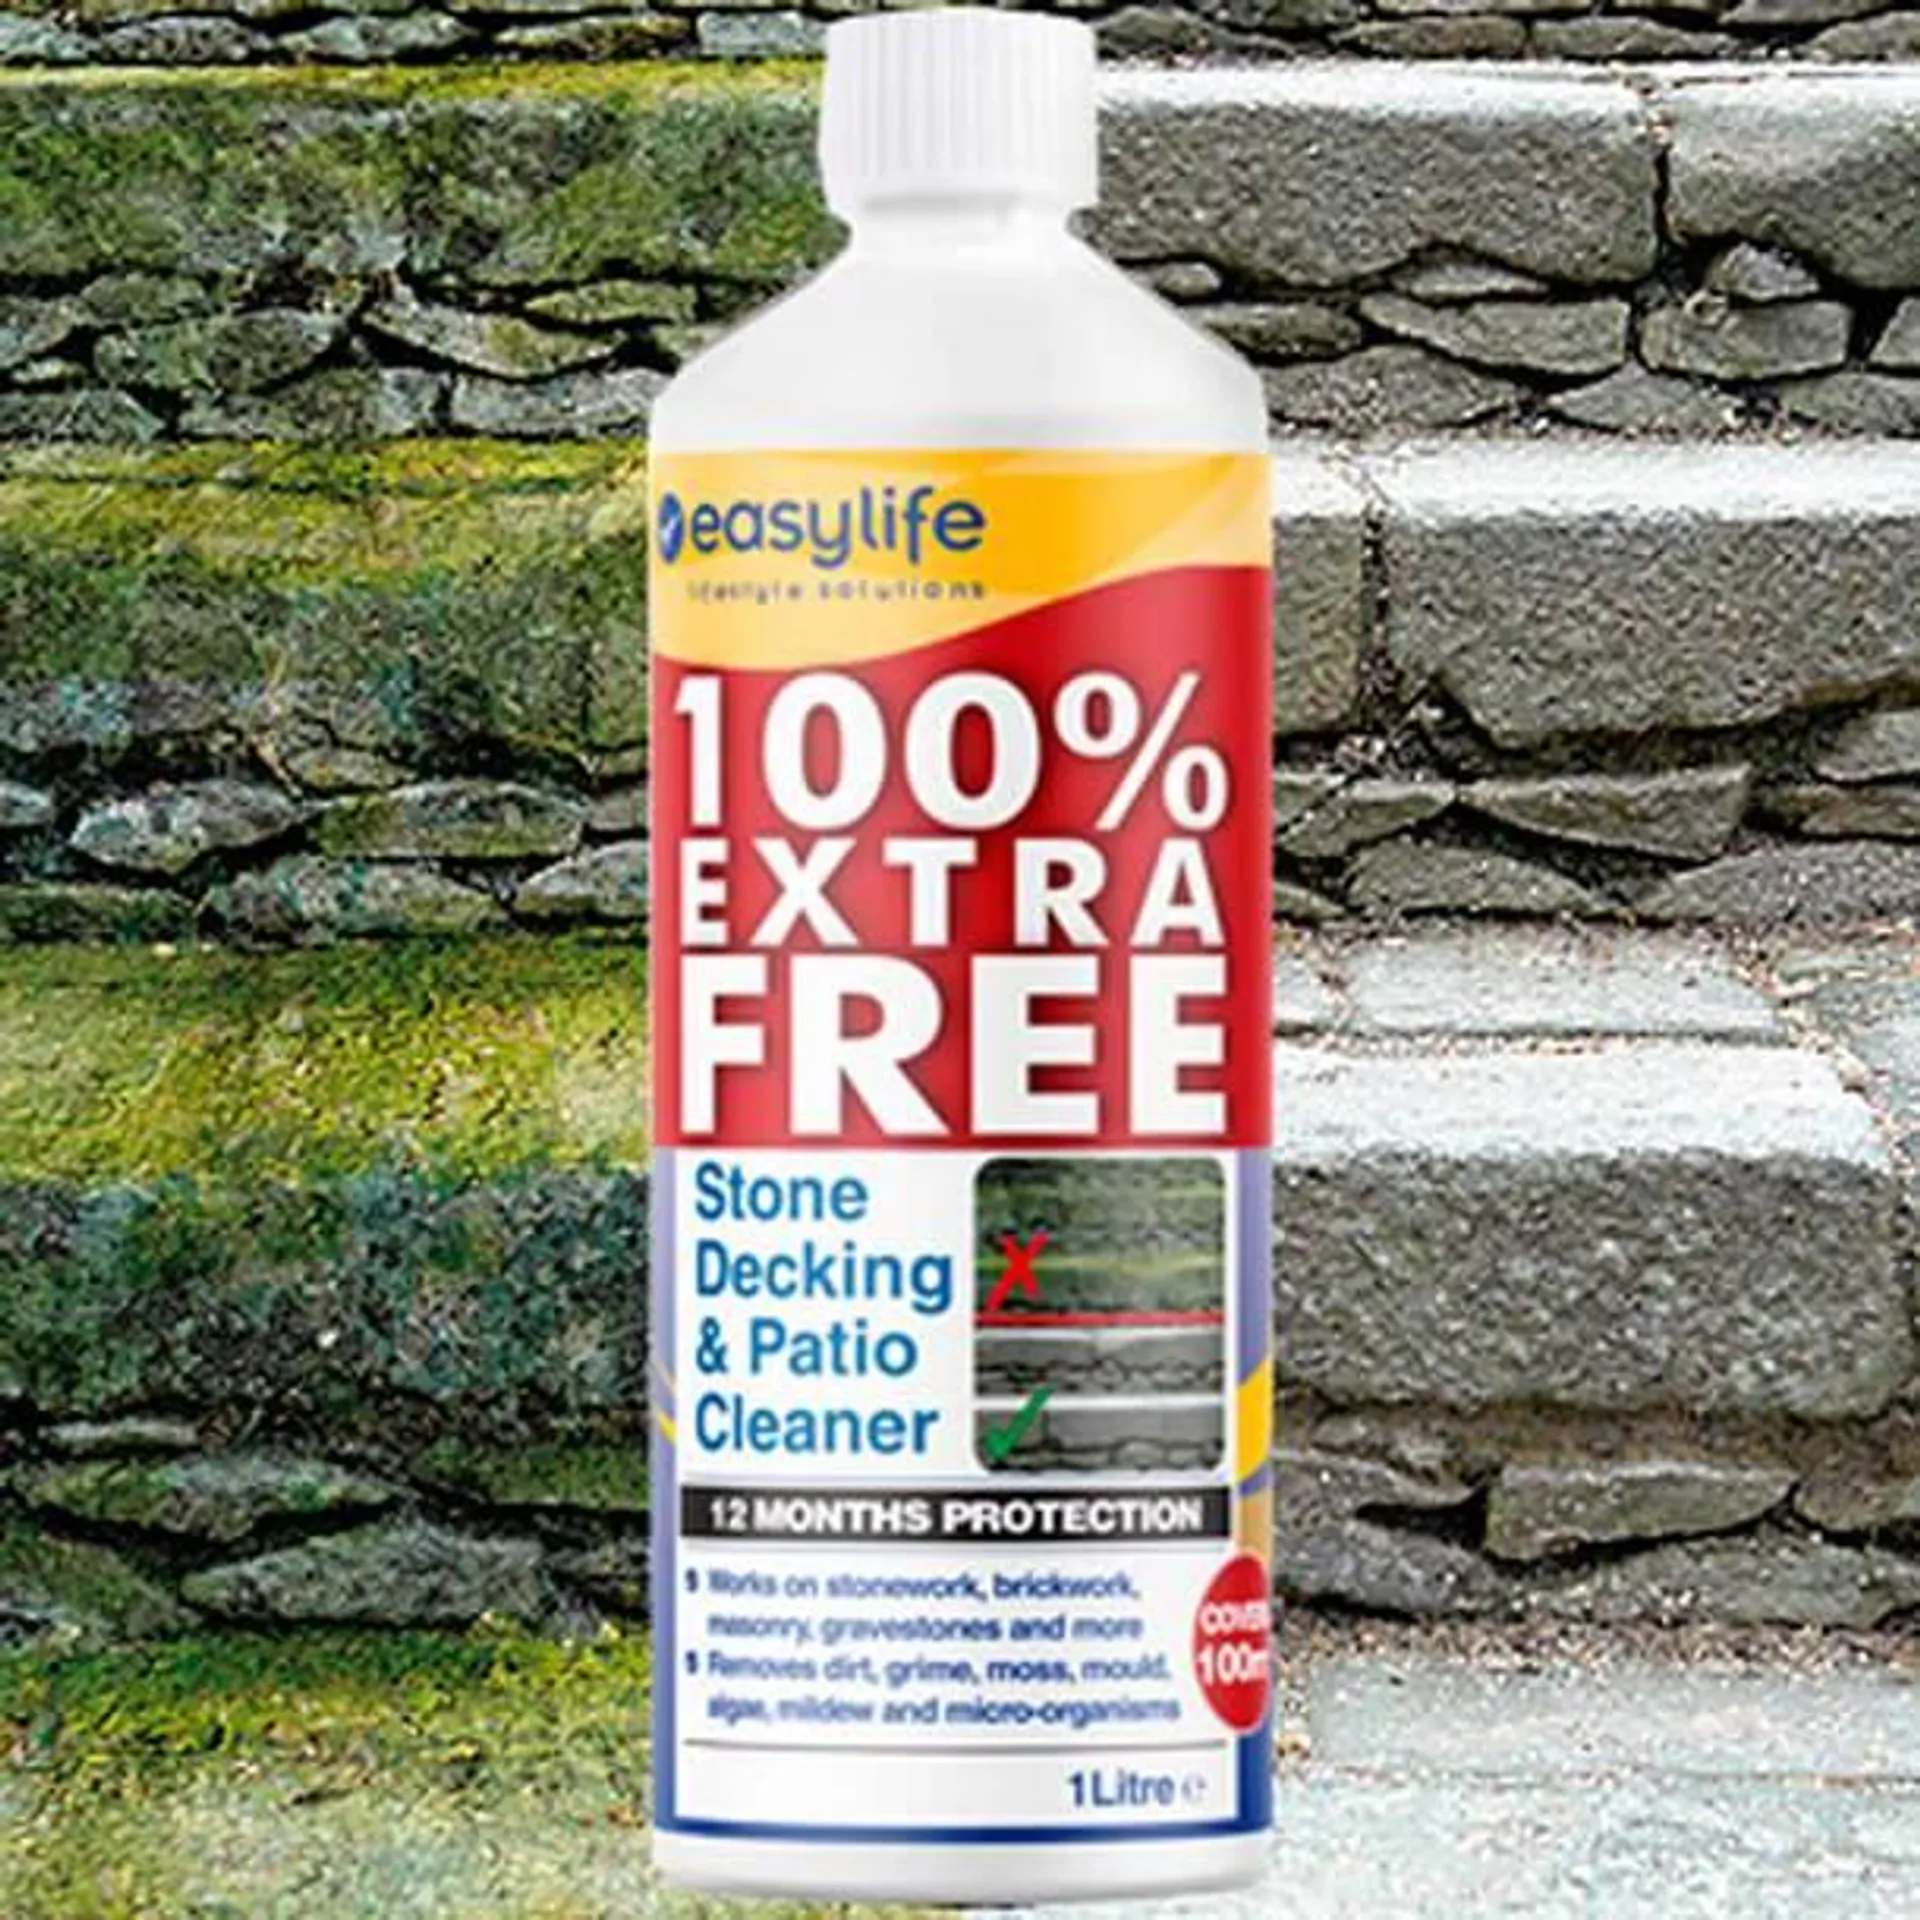 Stone, Patio and Decking Cleaner